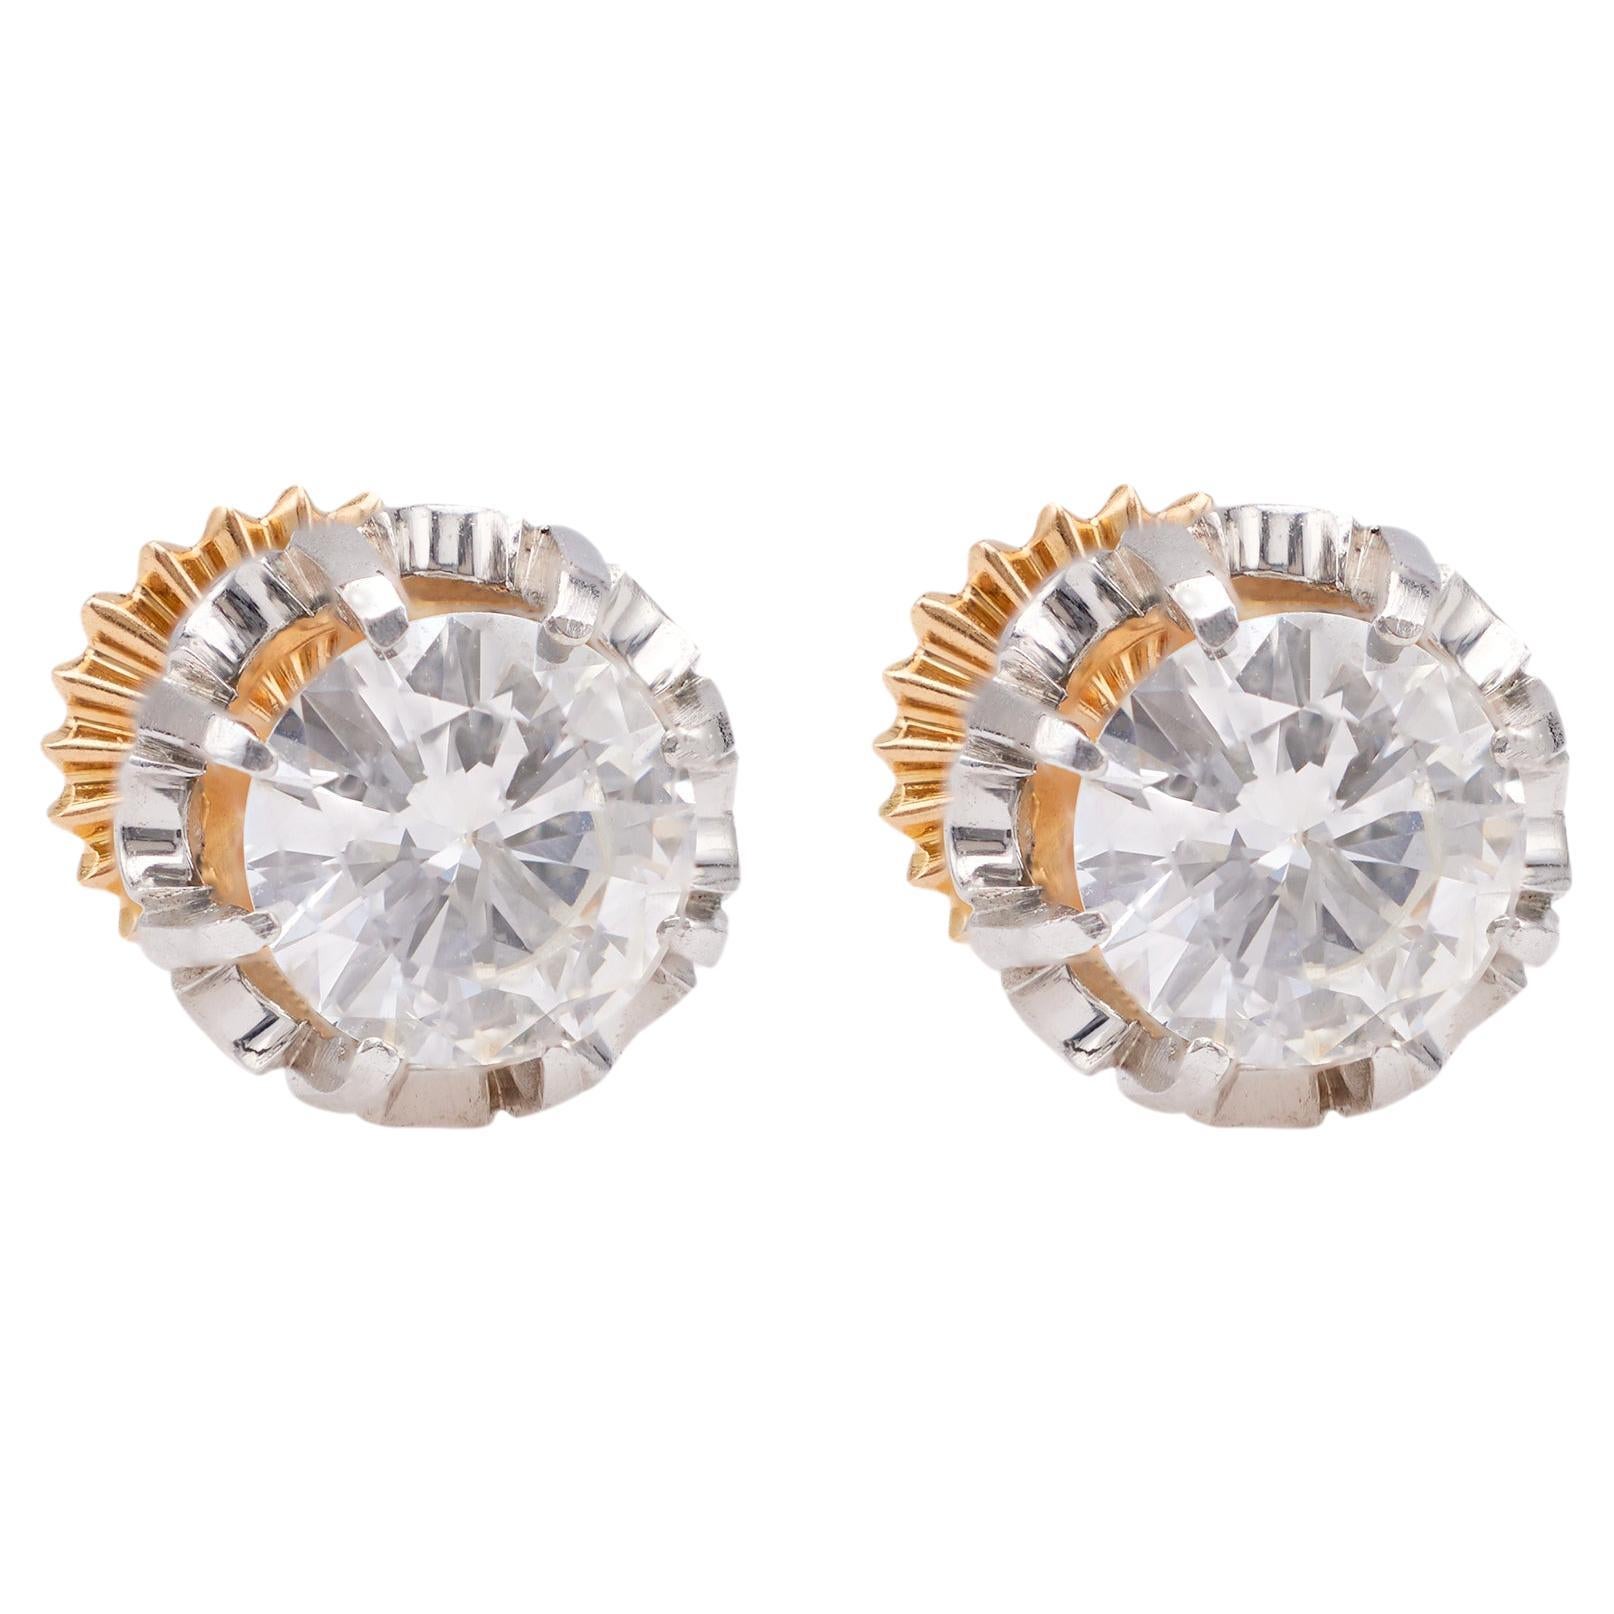 Antique Inspired 1.50 Carat Total Weight Diamond Stud Earrings For Sale